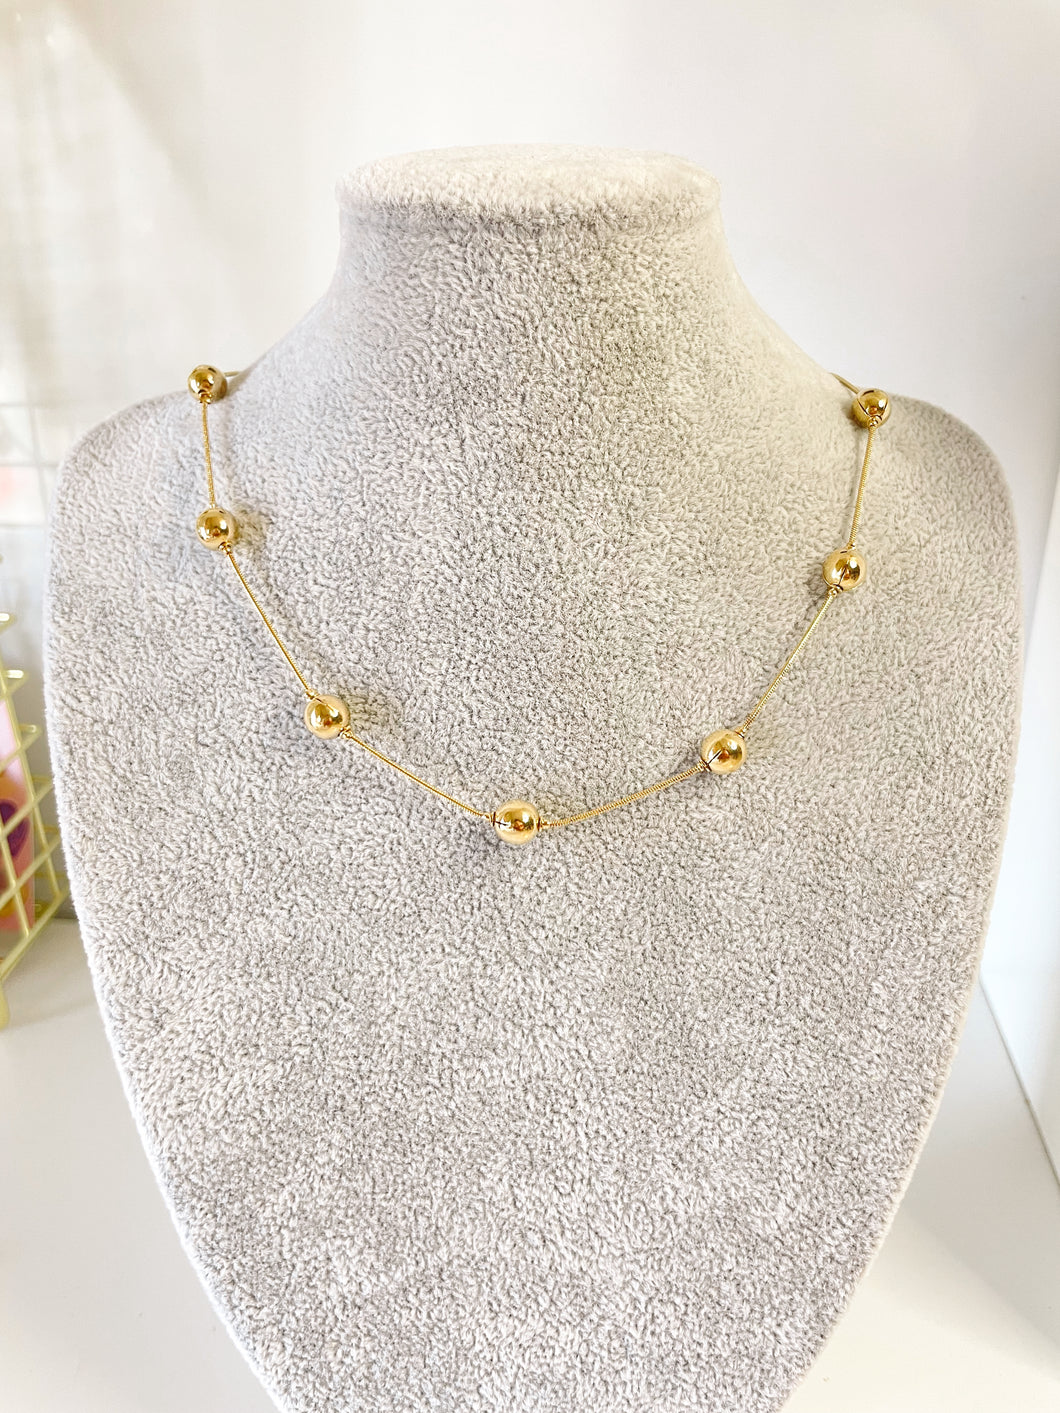 Gold Ball Necklace